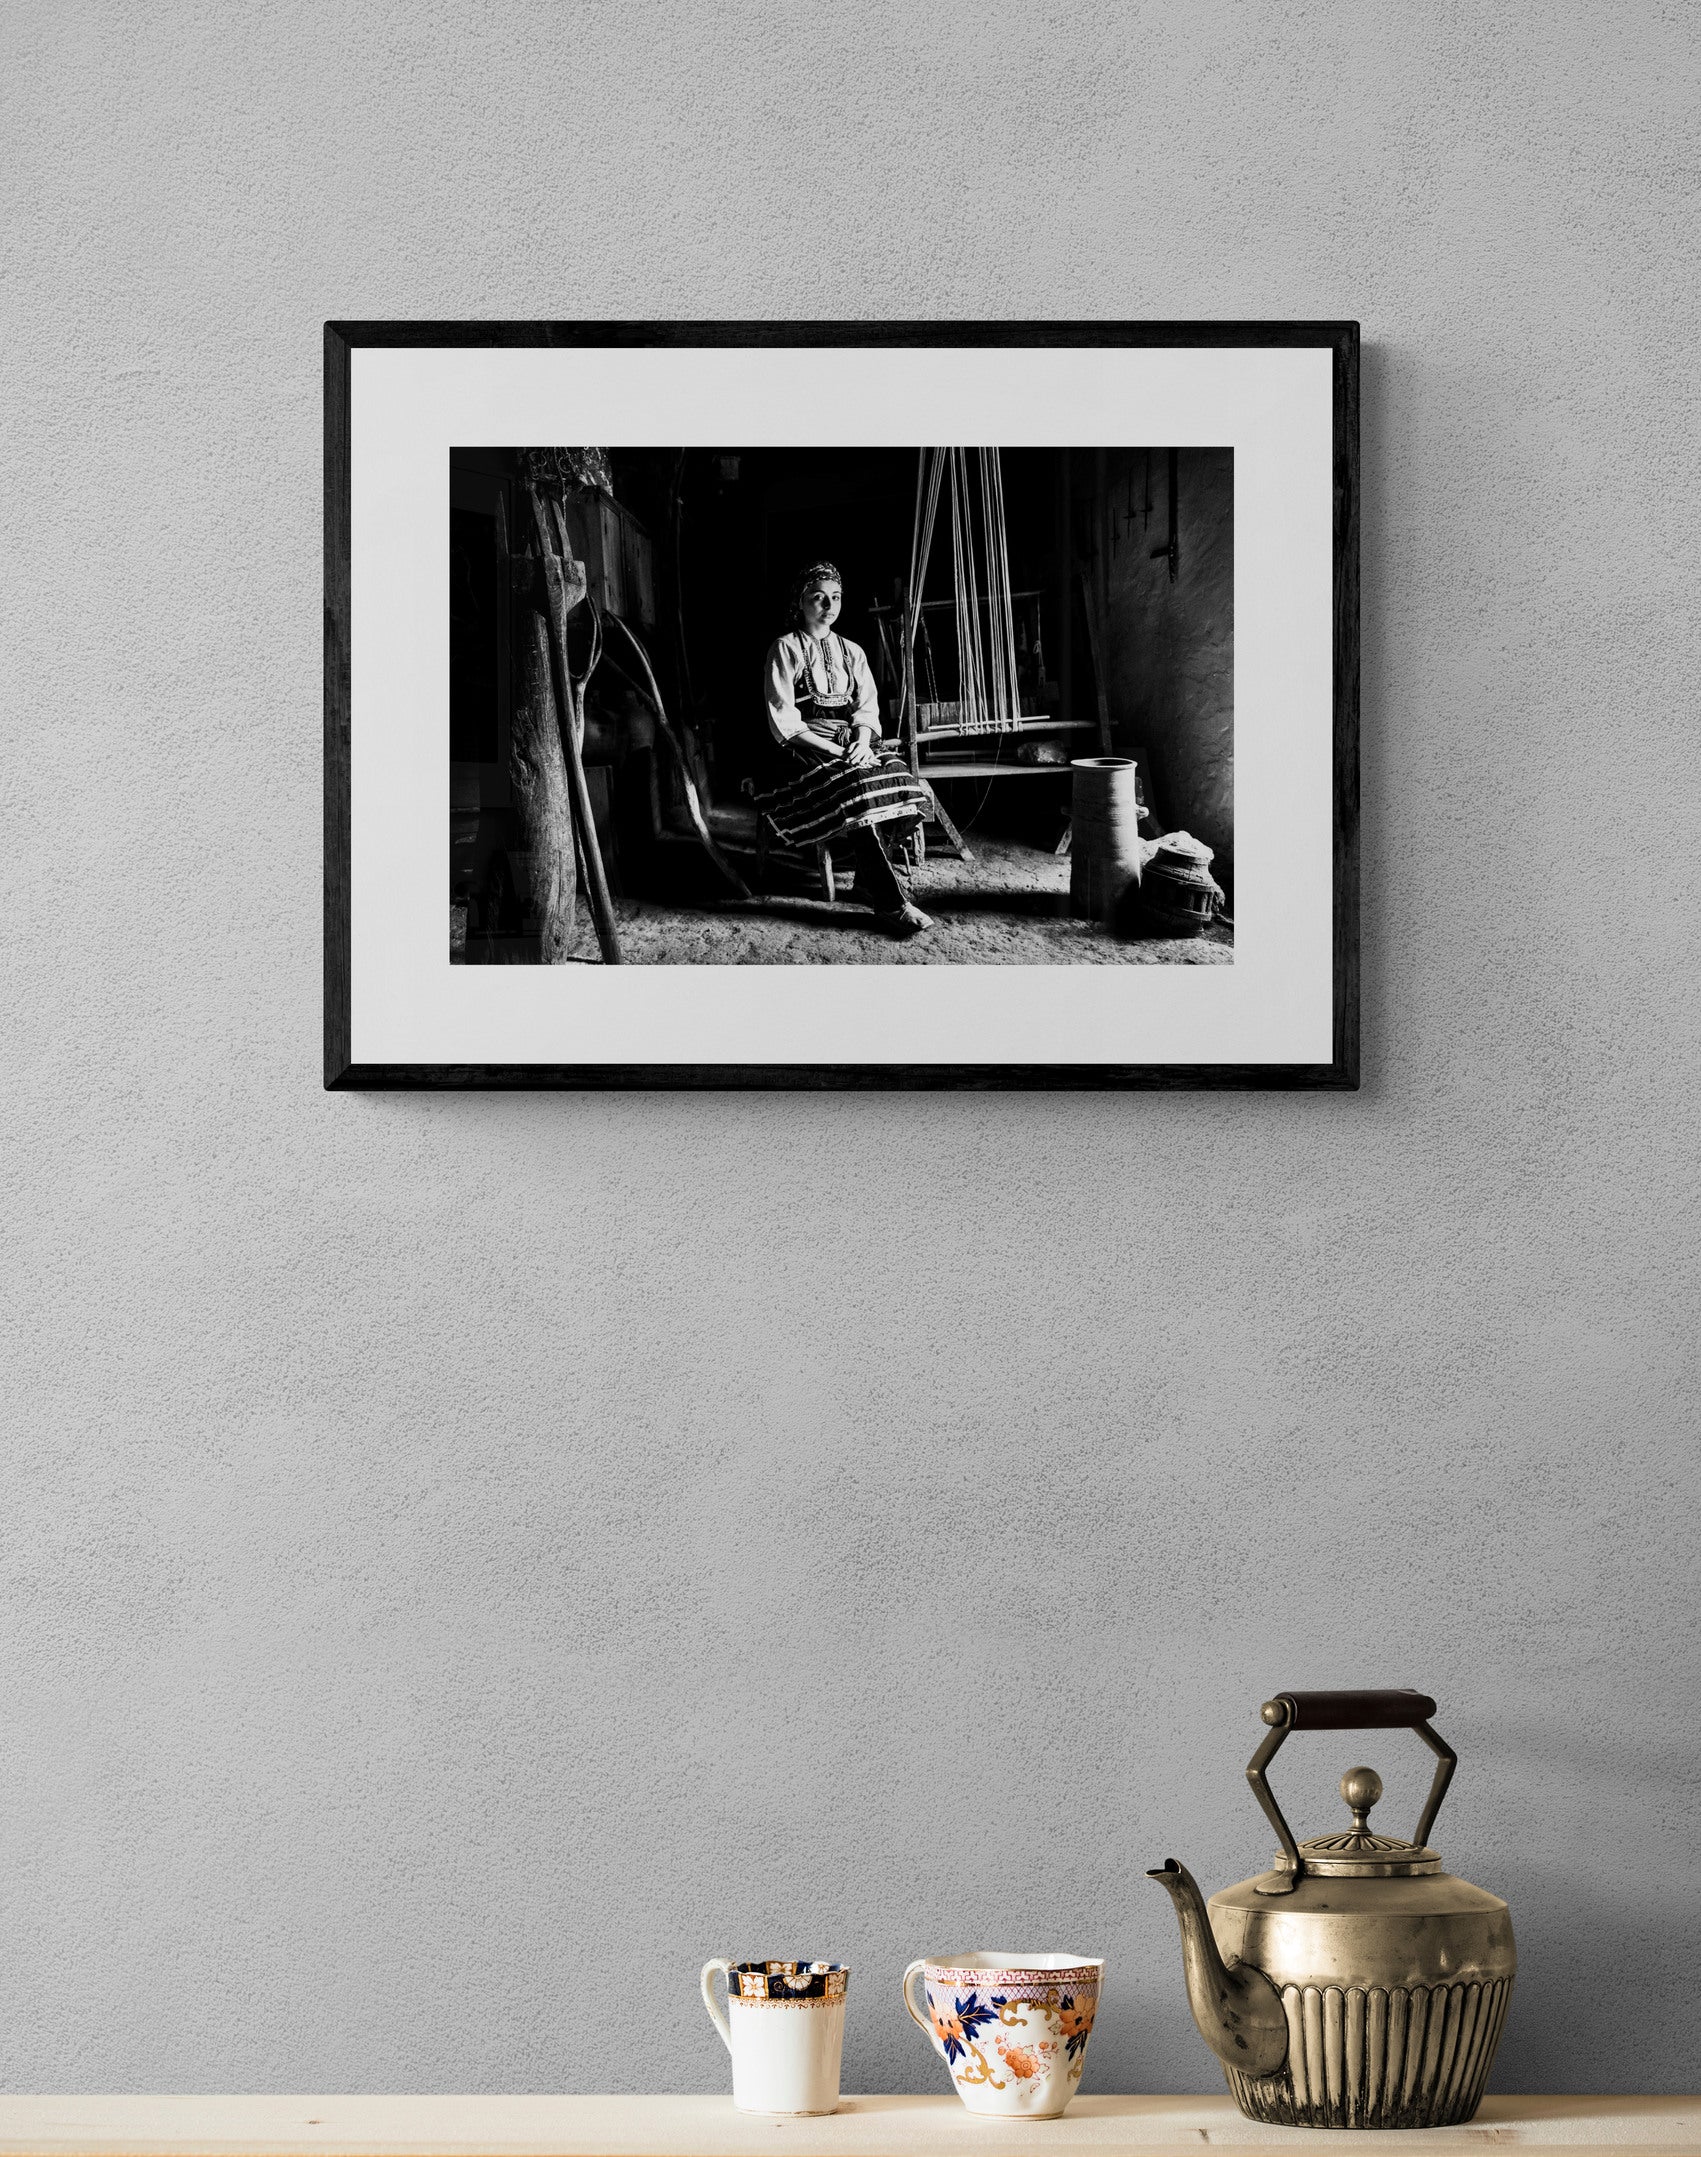 Black and White Photography Wall Art Greece | The traditional costume of Emponas by a loom Rhodes by George Tatakis - single framed photo